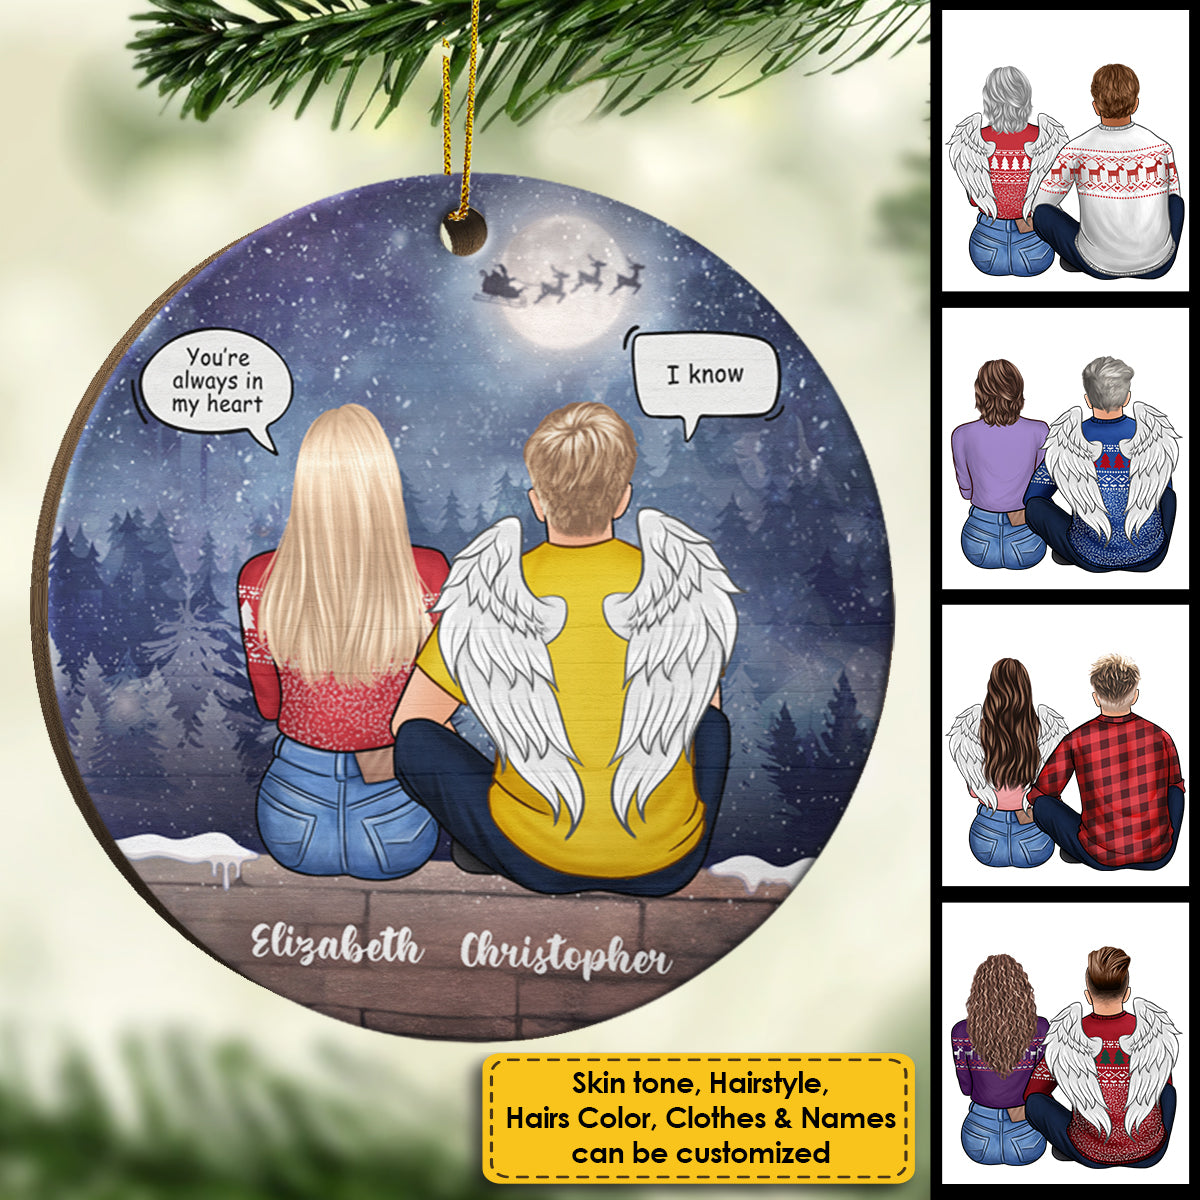 Miss You Everyday - Personalized Custom Shaped Wooden Ornament